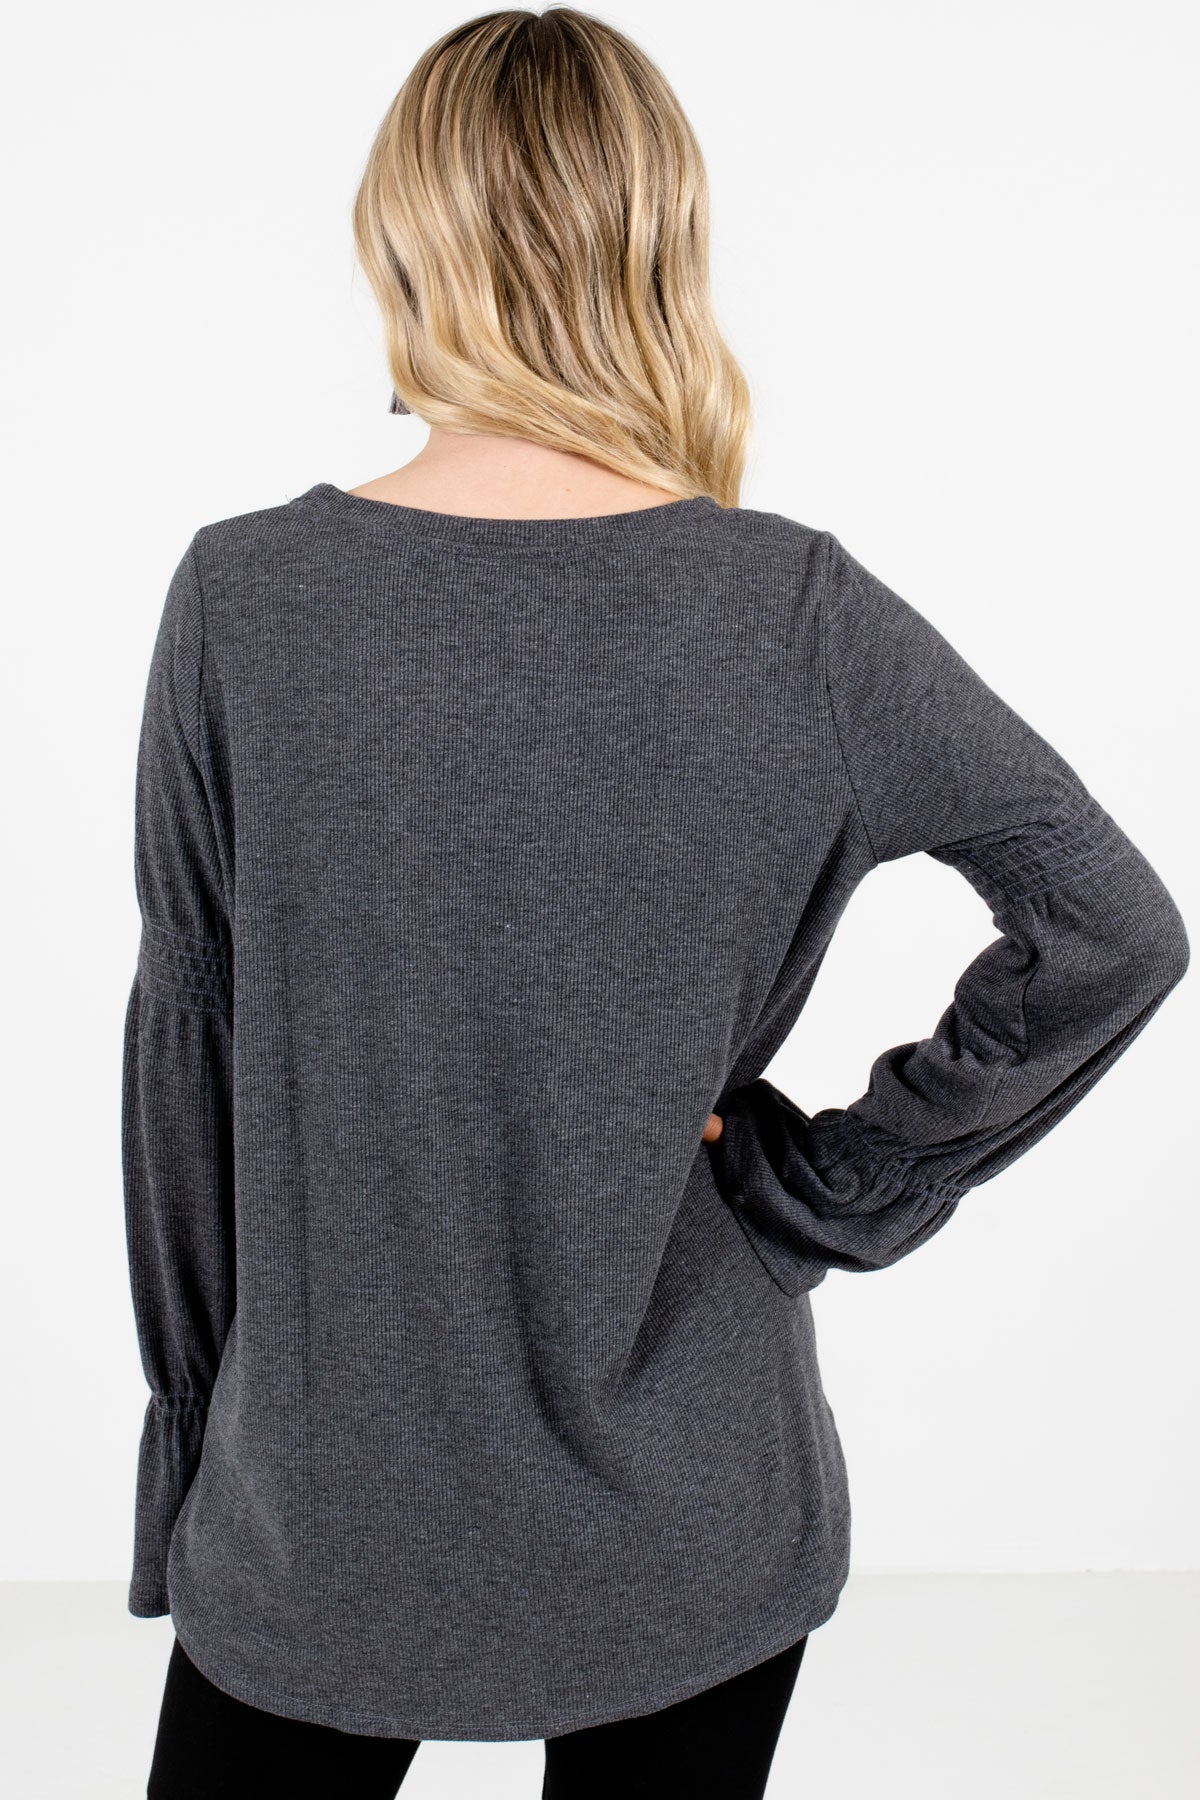 Women’s Charcoal Gray Bell Sleeve Style Boutique Tops